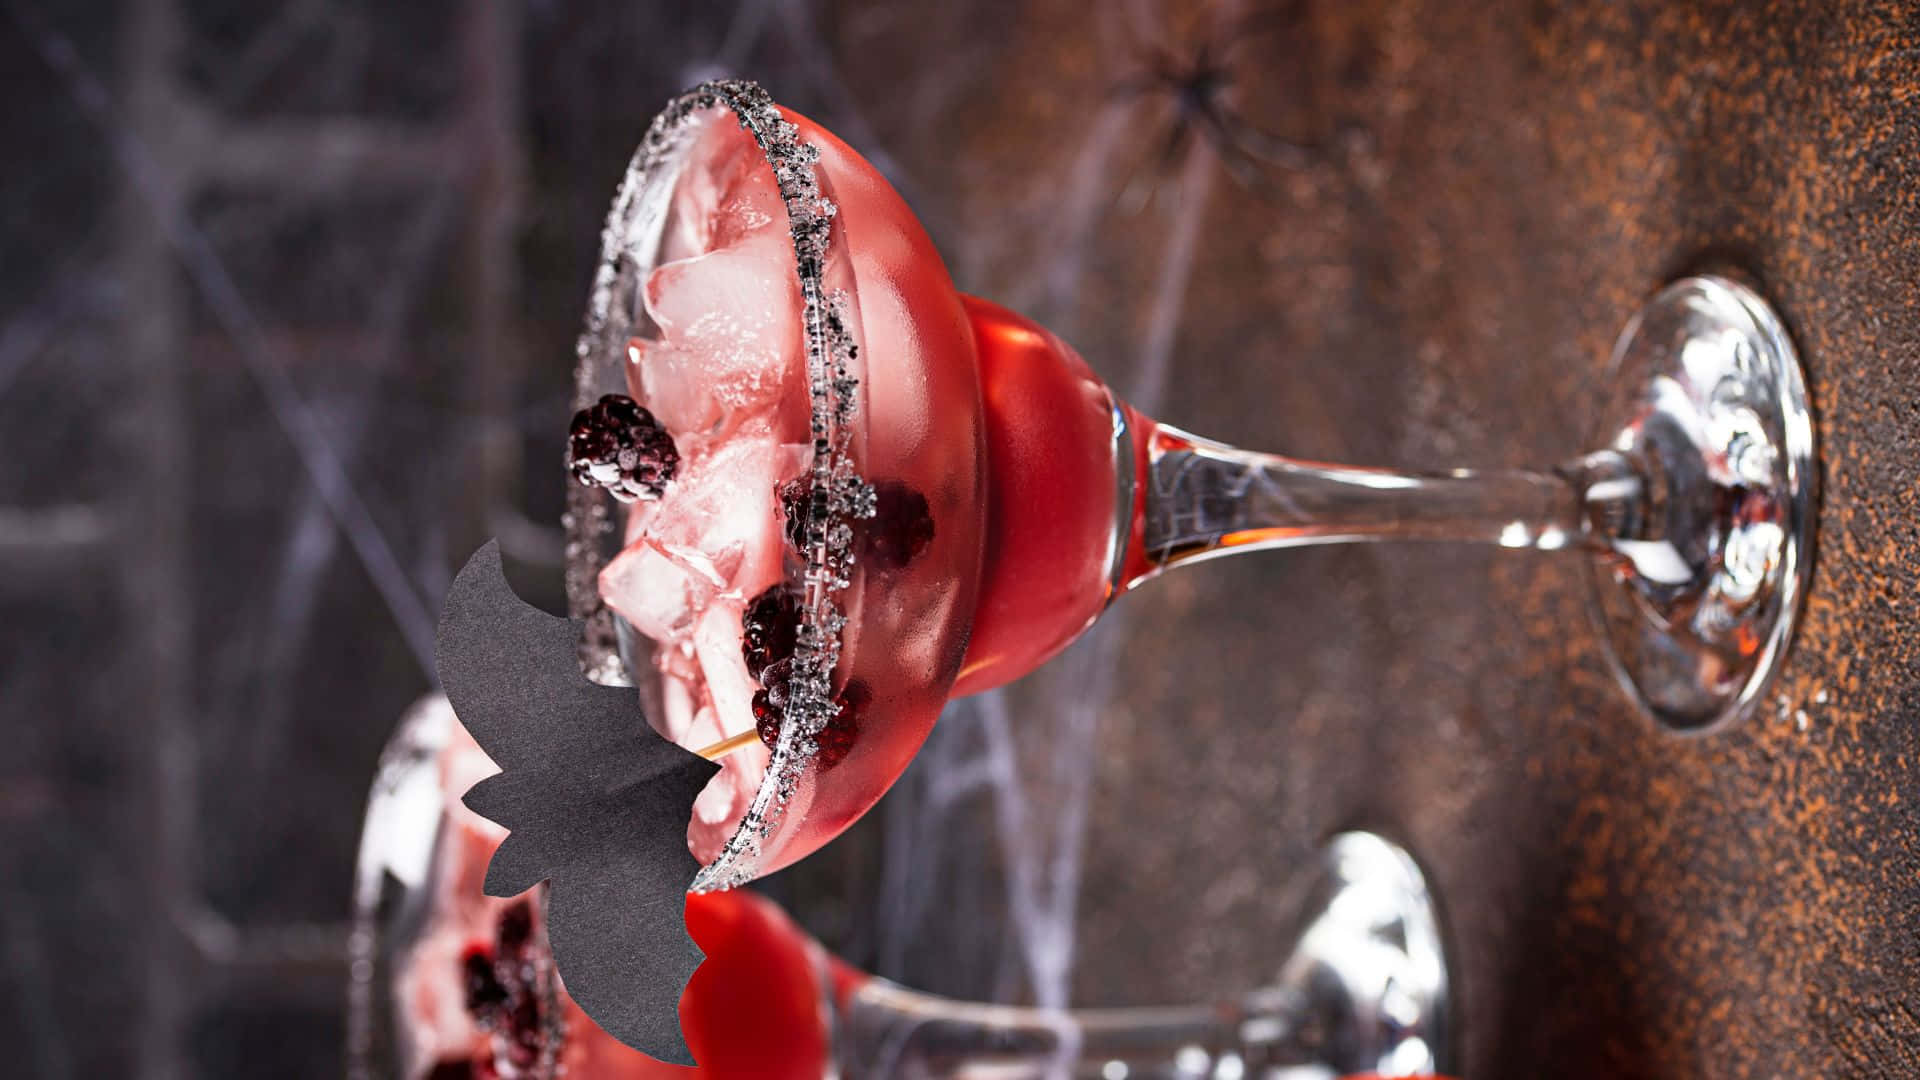 Get into the spirit of the season with our festive Halloween Cocktails! Wallpaper